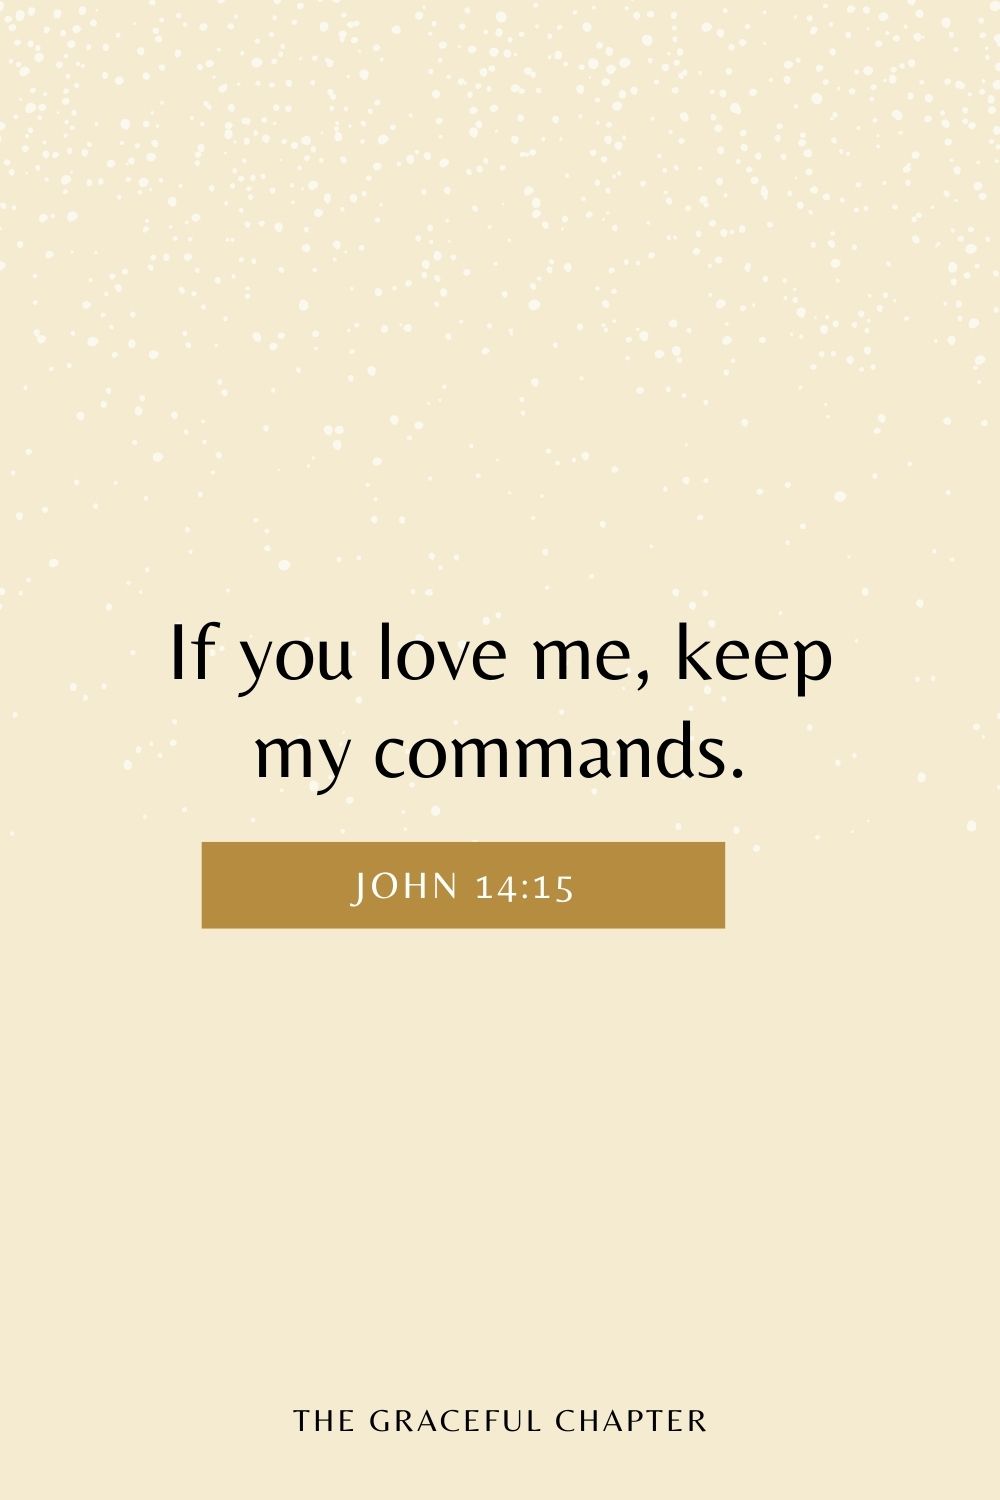 If you love me, keep my commands. John 14:15